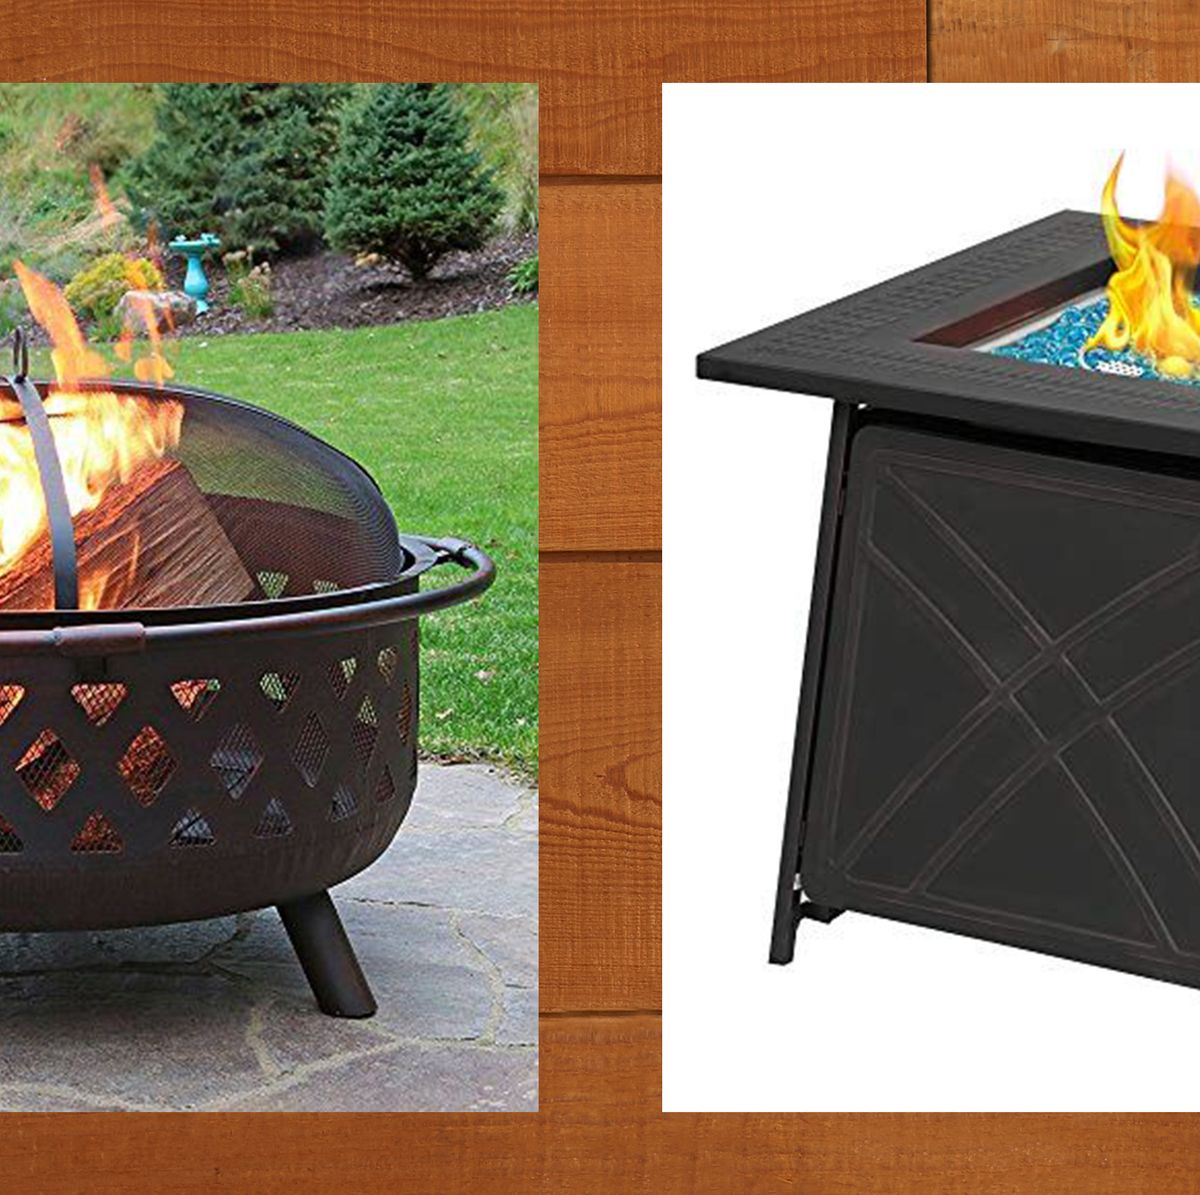 Large Tabletop Fire Pit Bowl Indoor Fire Pit Tabletop Mini Fire Pit for  Table Top Fire Pits Indoor Firepits Counter Top Fire Pit Small Chimenea de